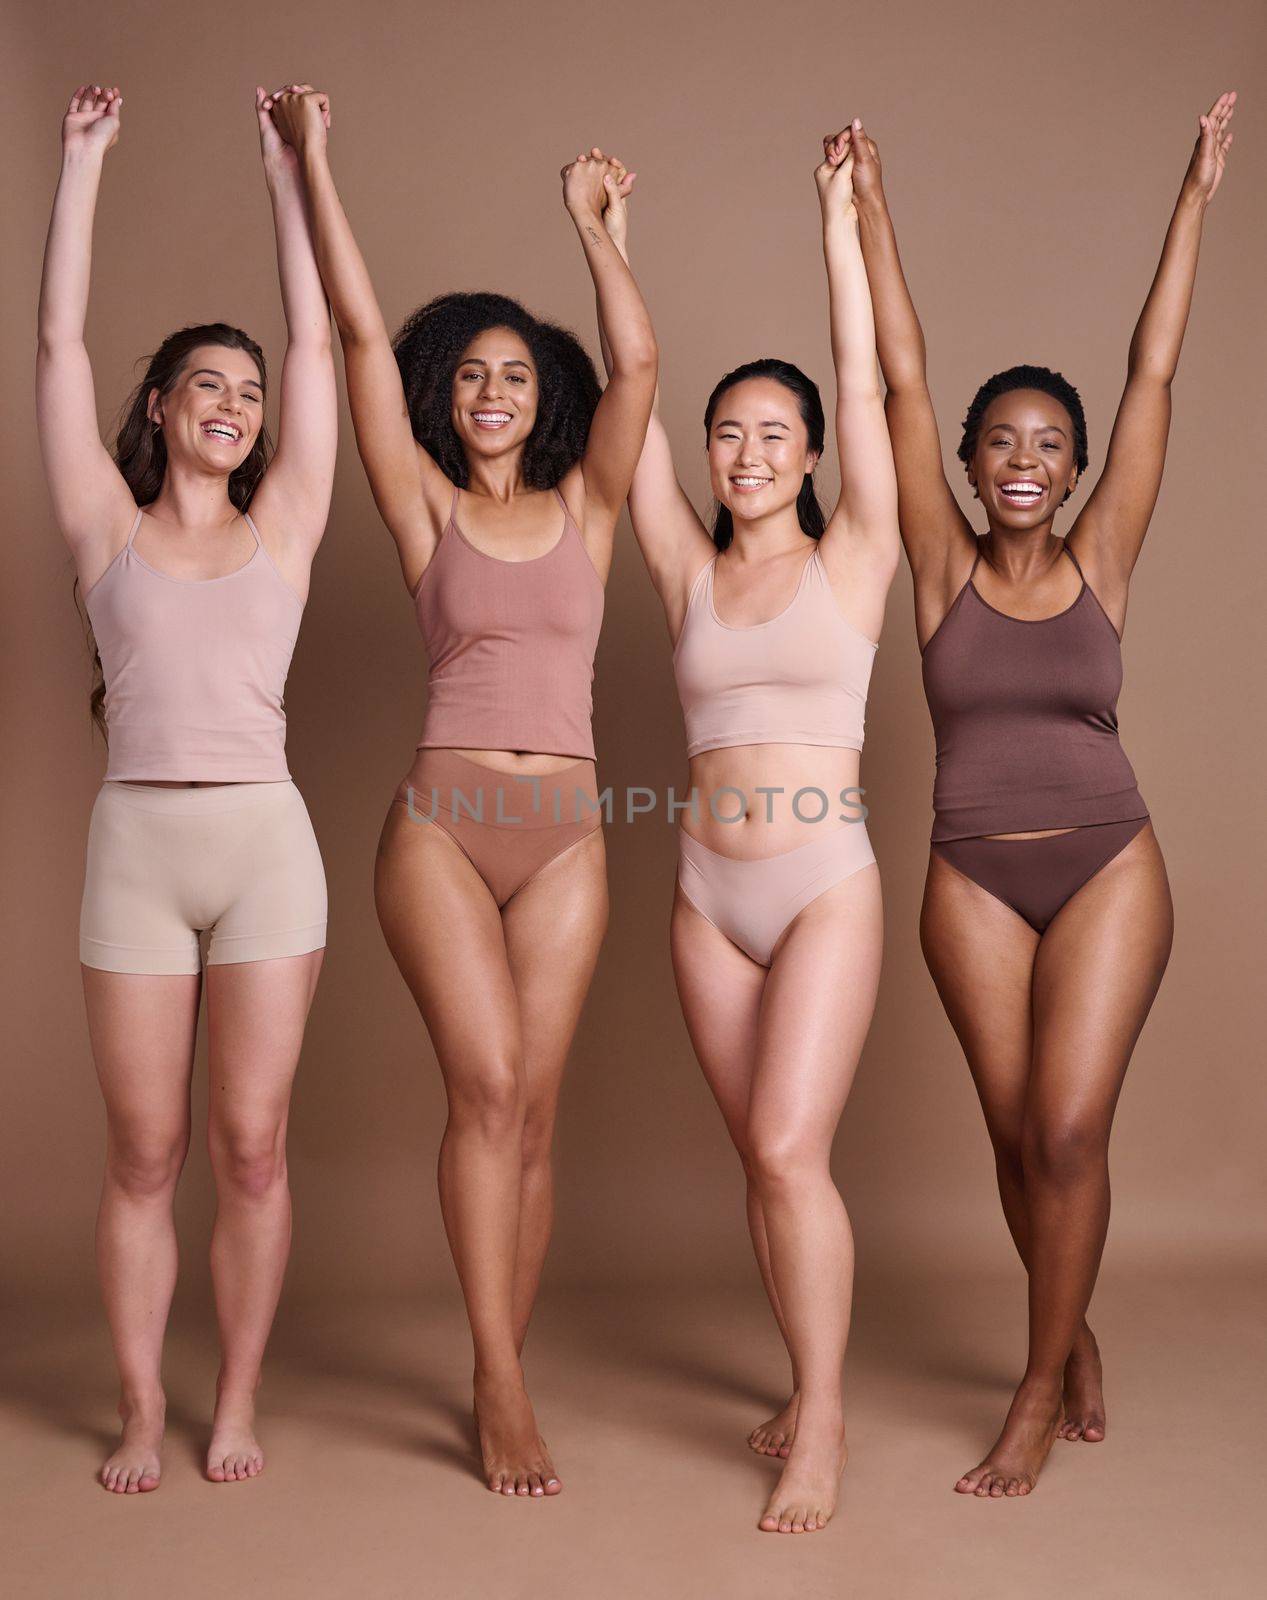 Diversity, woman and celebrate body positive in underwear for beauty motivation, happiness and confidence in studio. Interracial group of people, support and model smile celebration for solidarity.